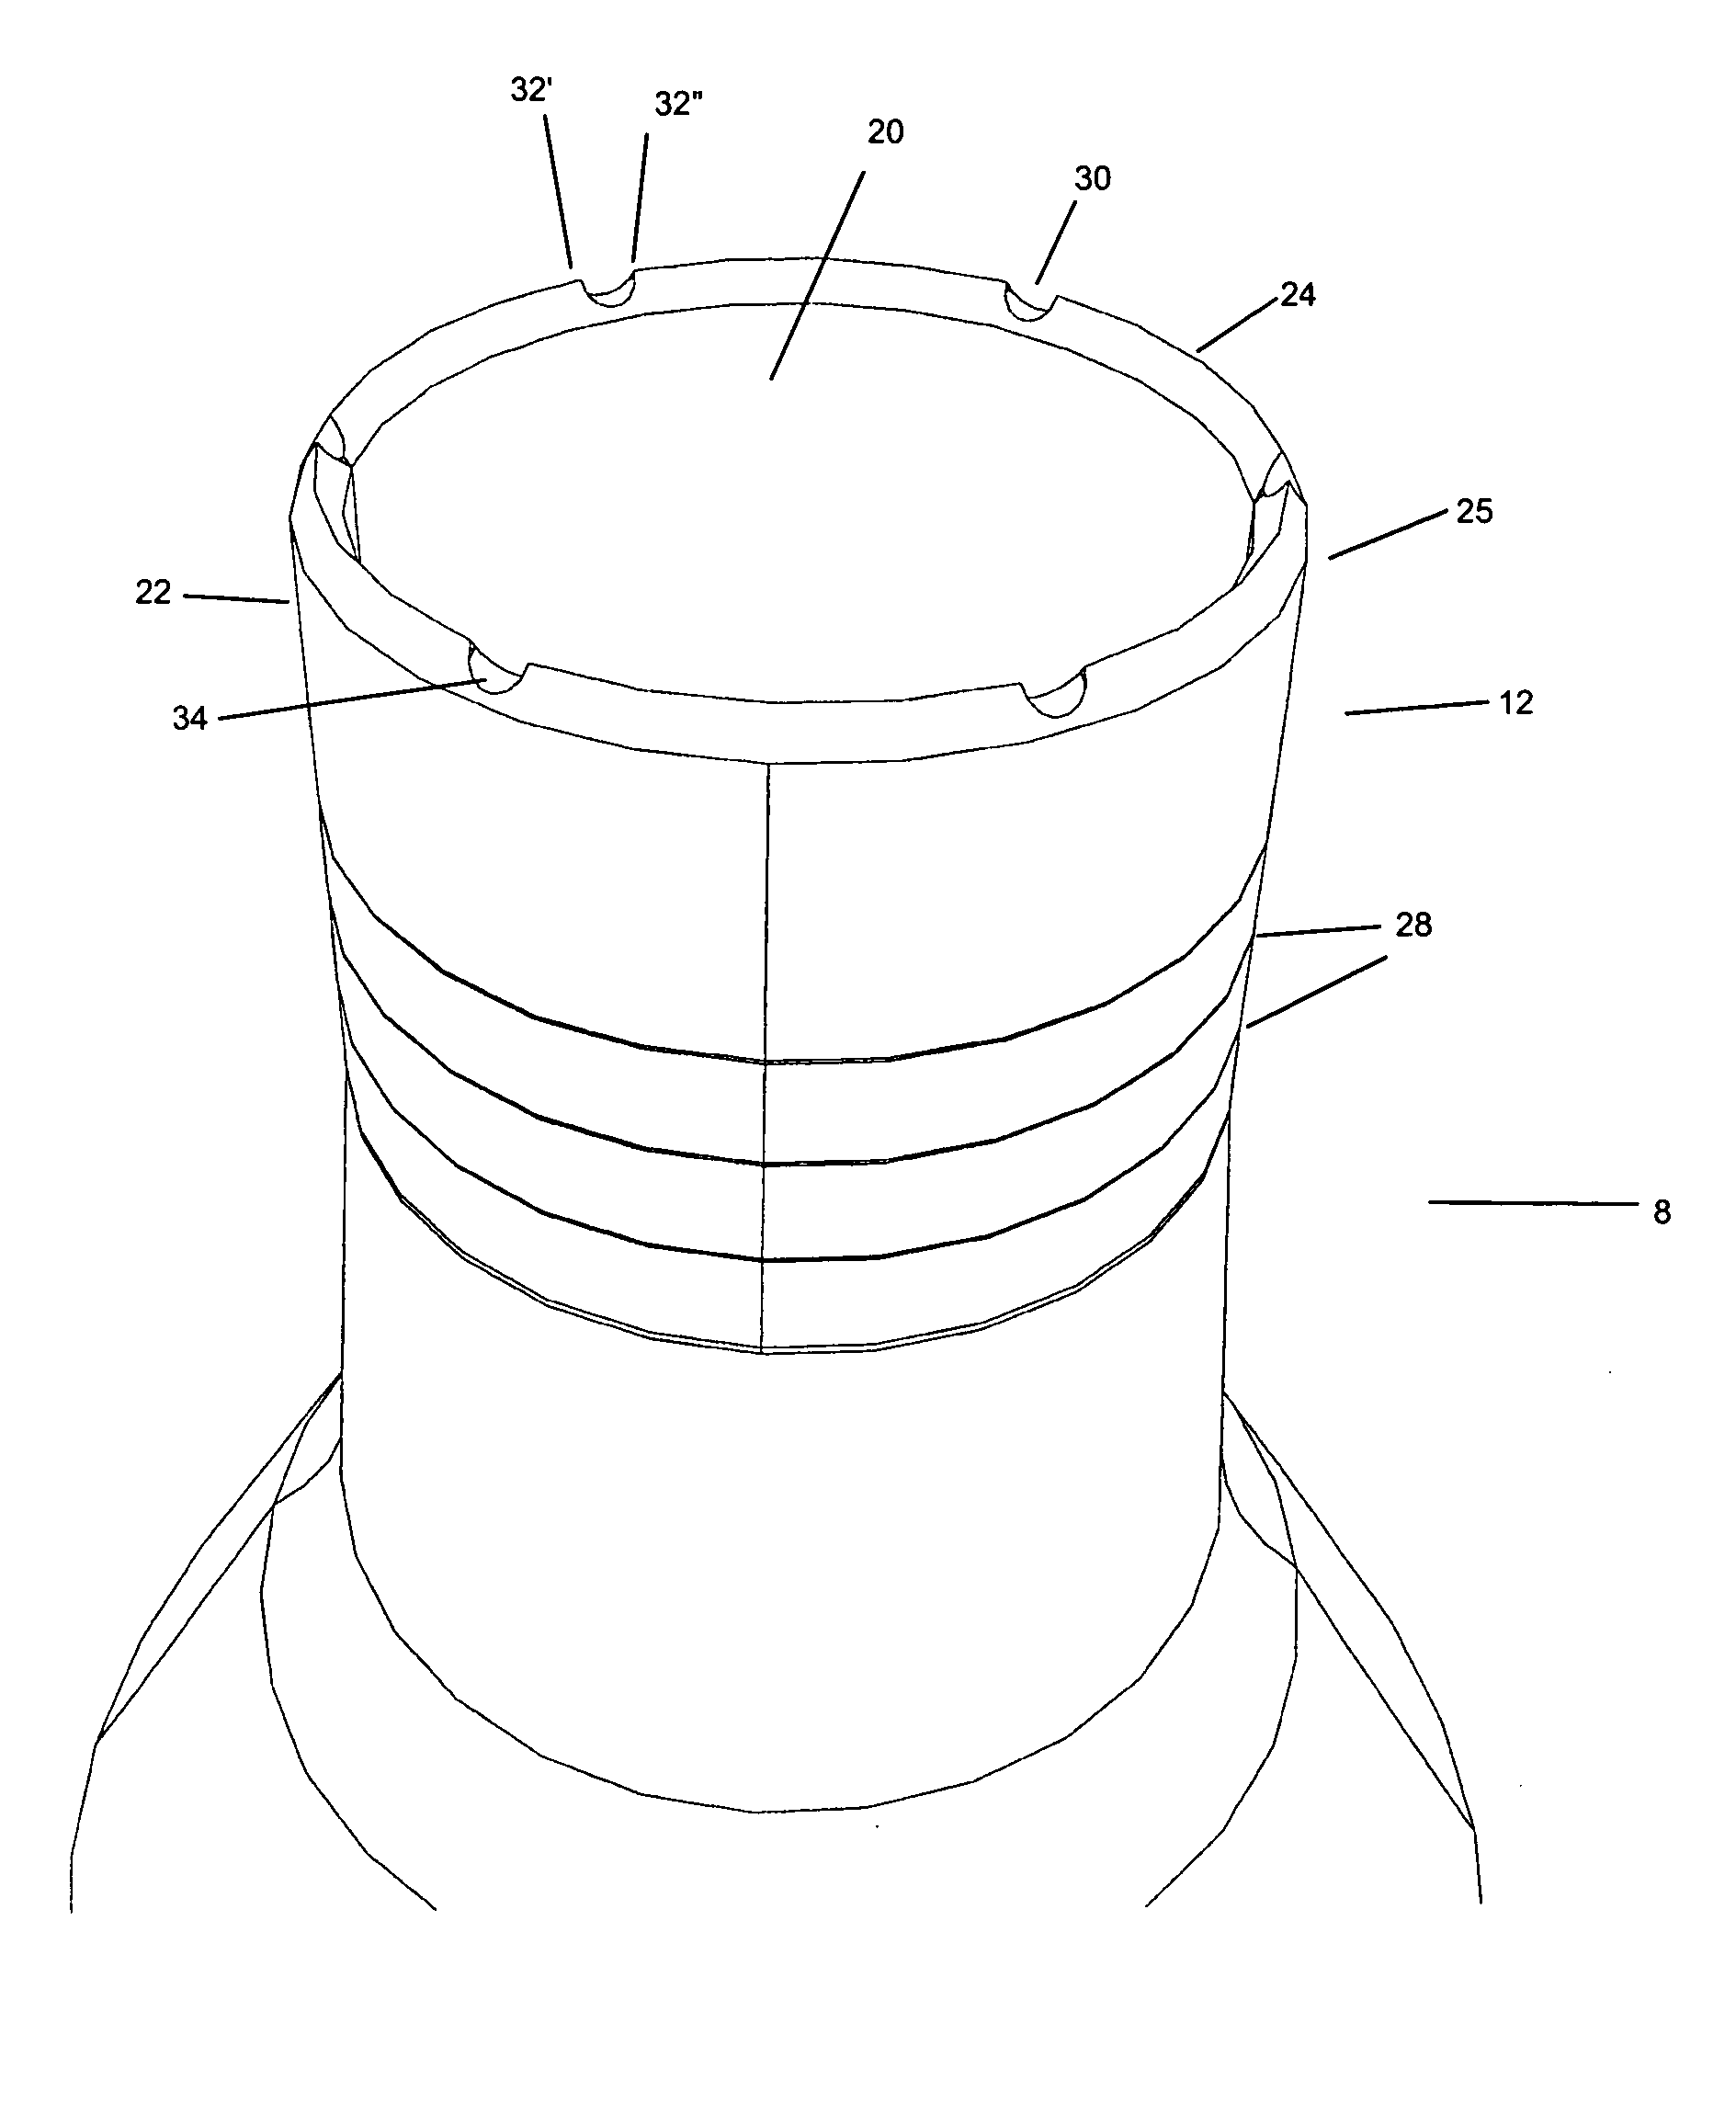 Coring device for preserving living tissue